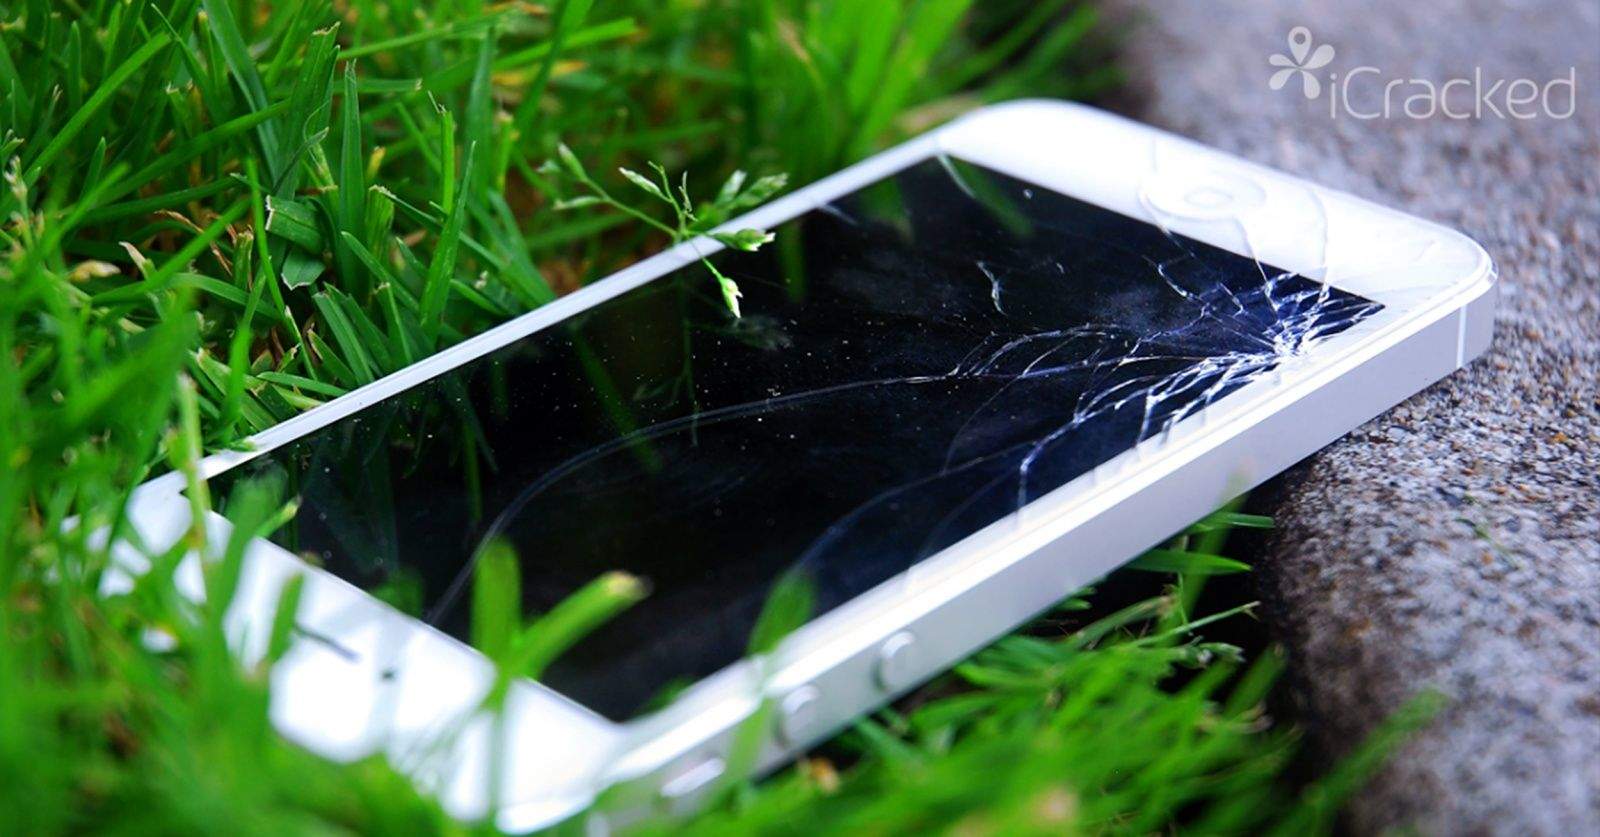 The repair service iCracked will fix Apple and Samsung phones on the spot. Photo: iCracked